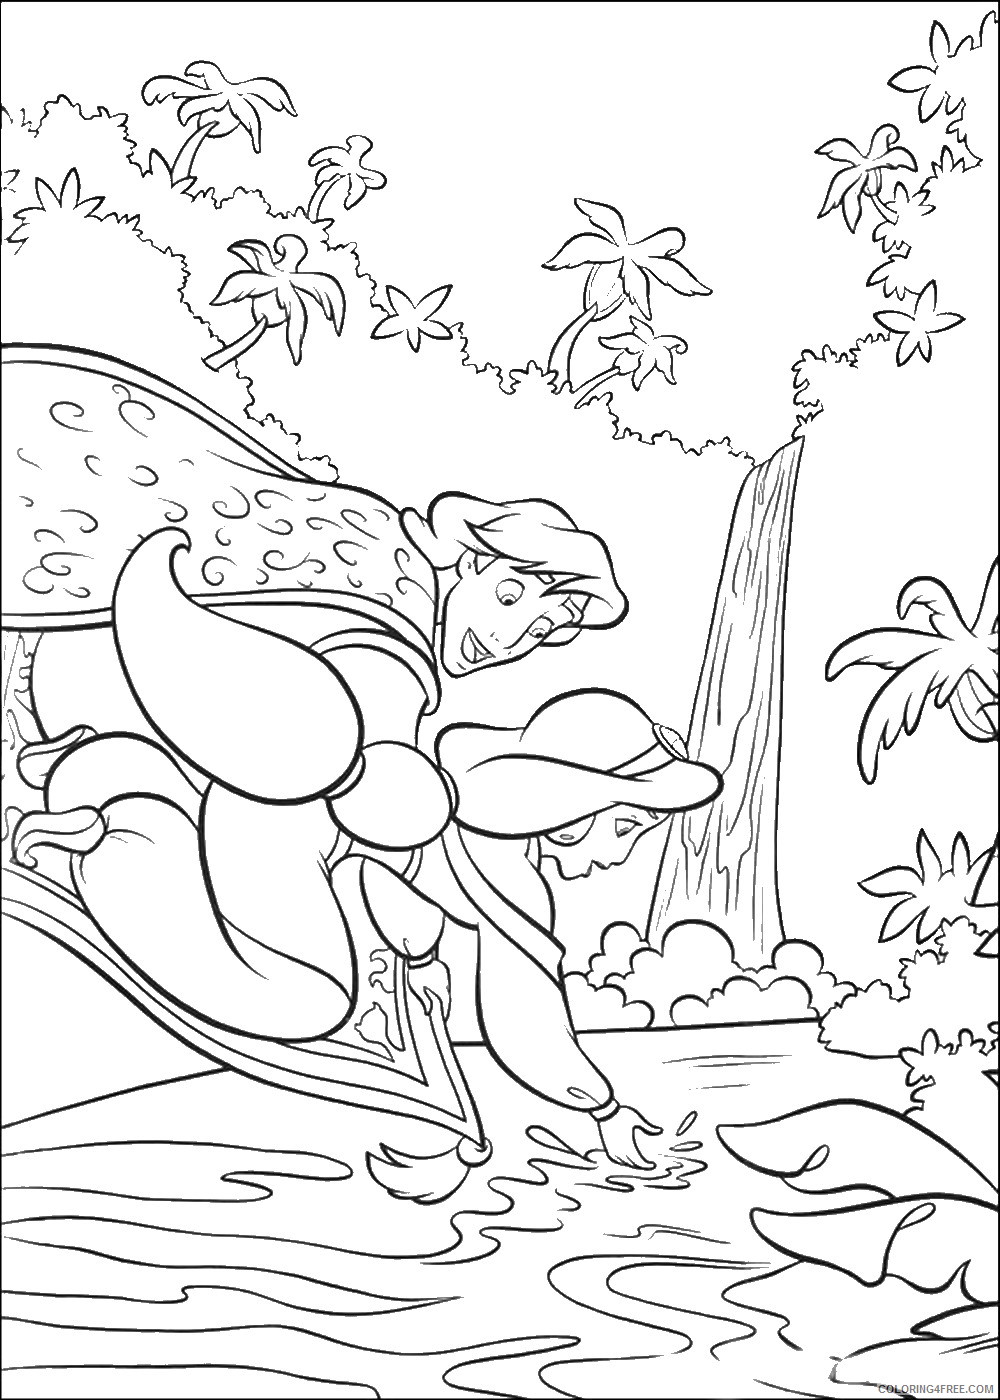 Aladdin Coloring Pages Cartoons aladdin_03 Printable 2020 0283 Coloring4free